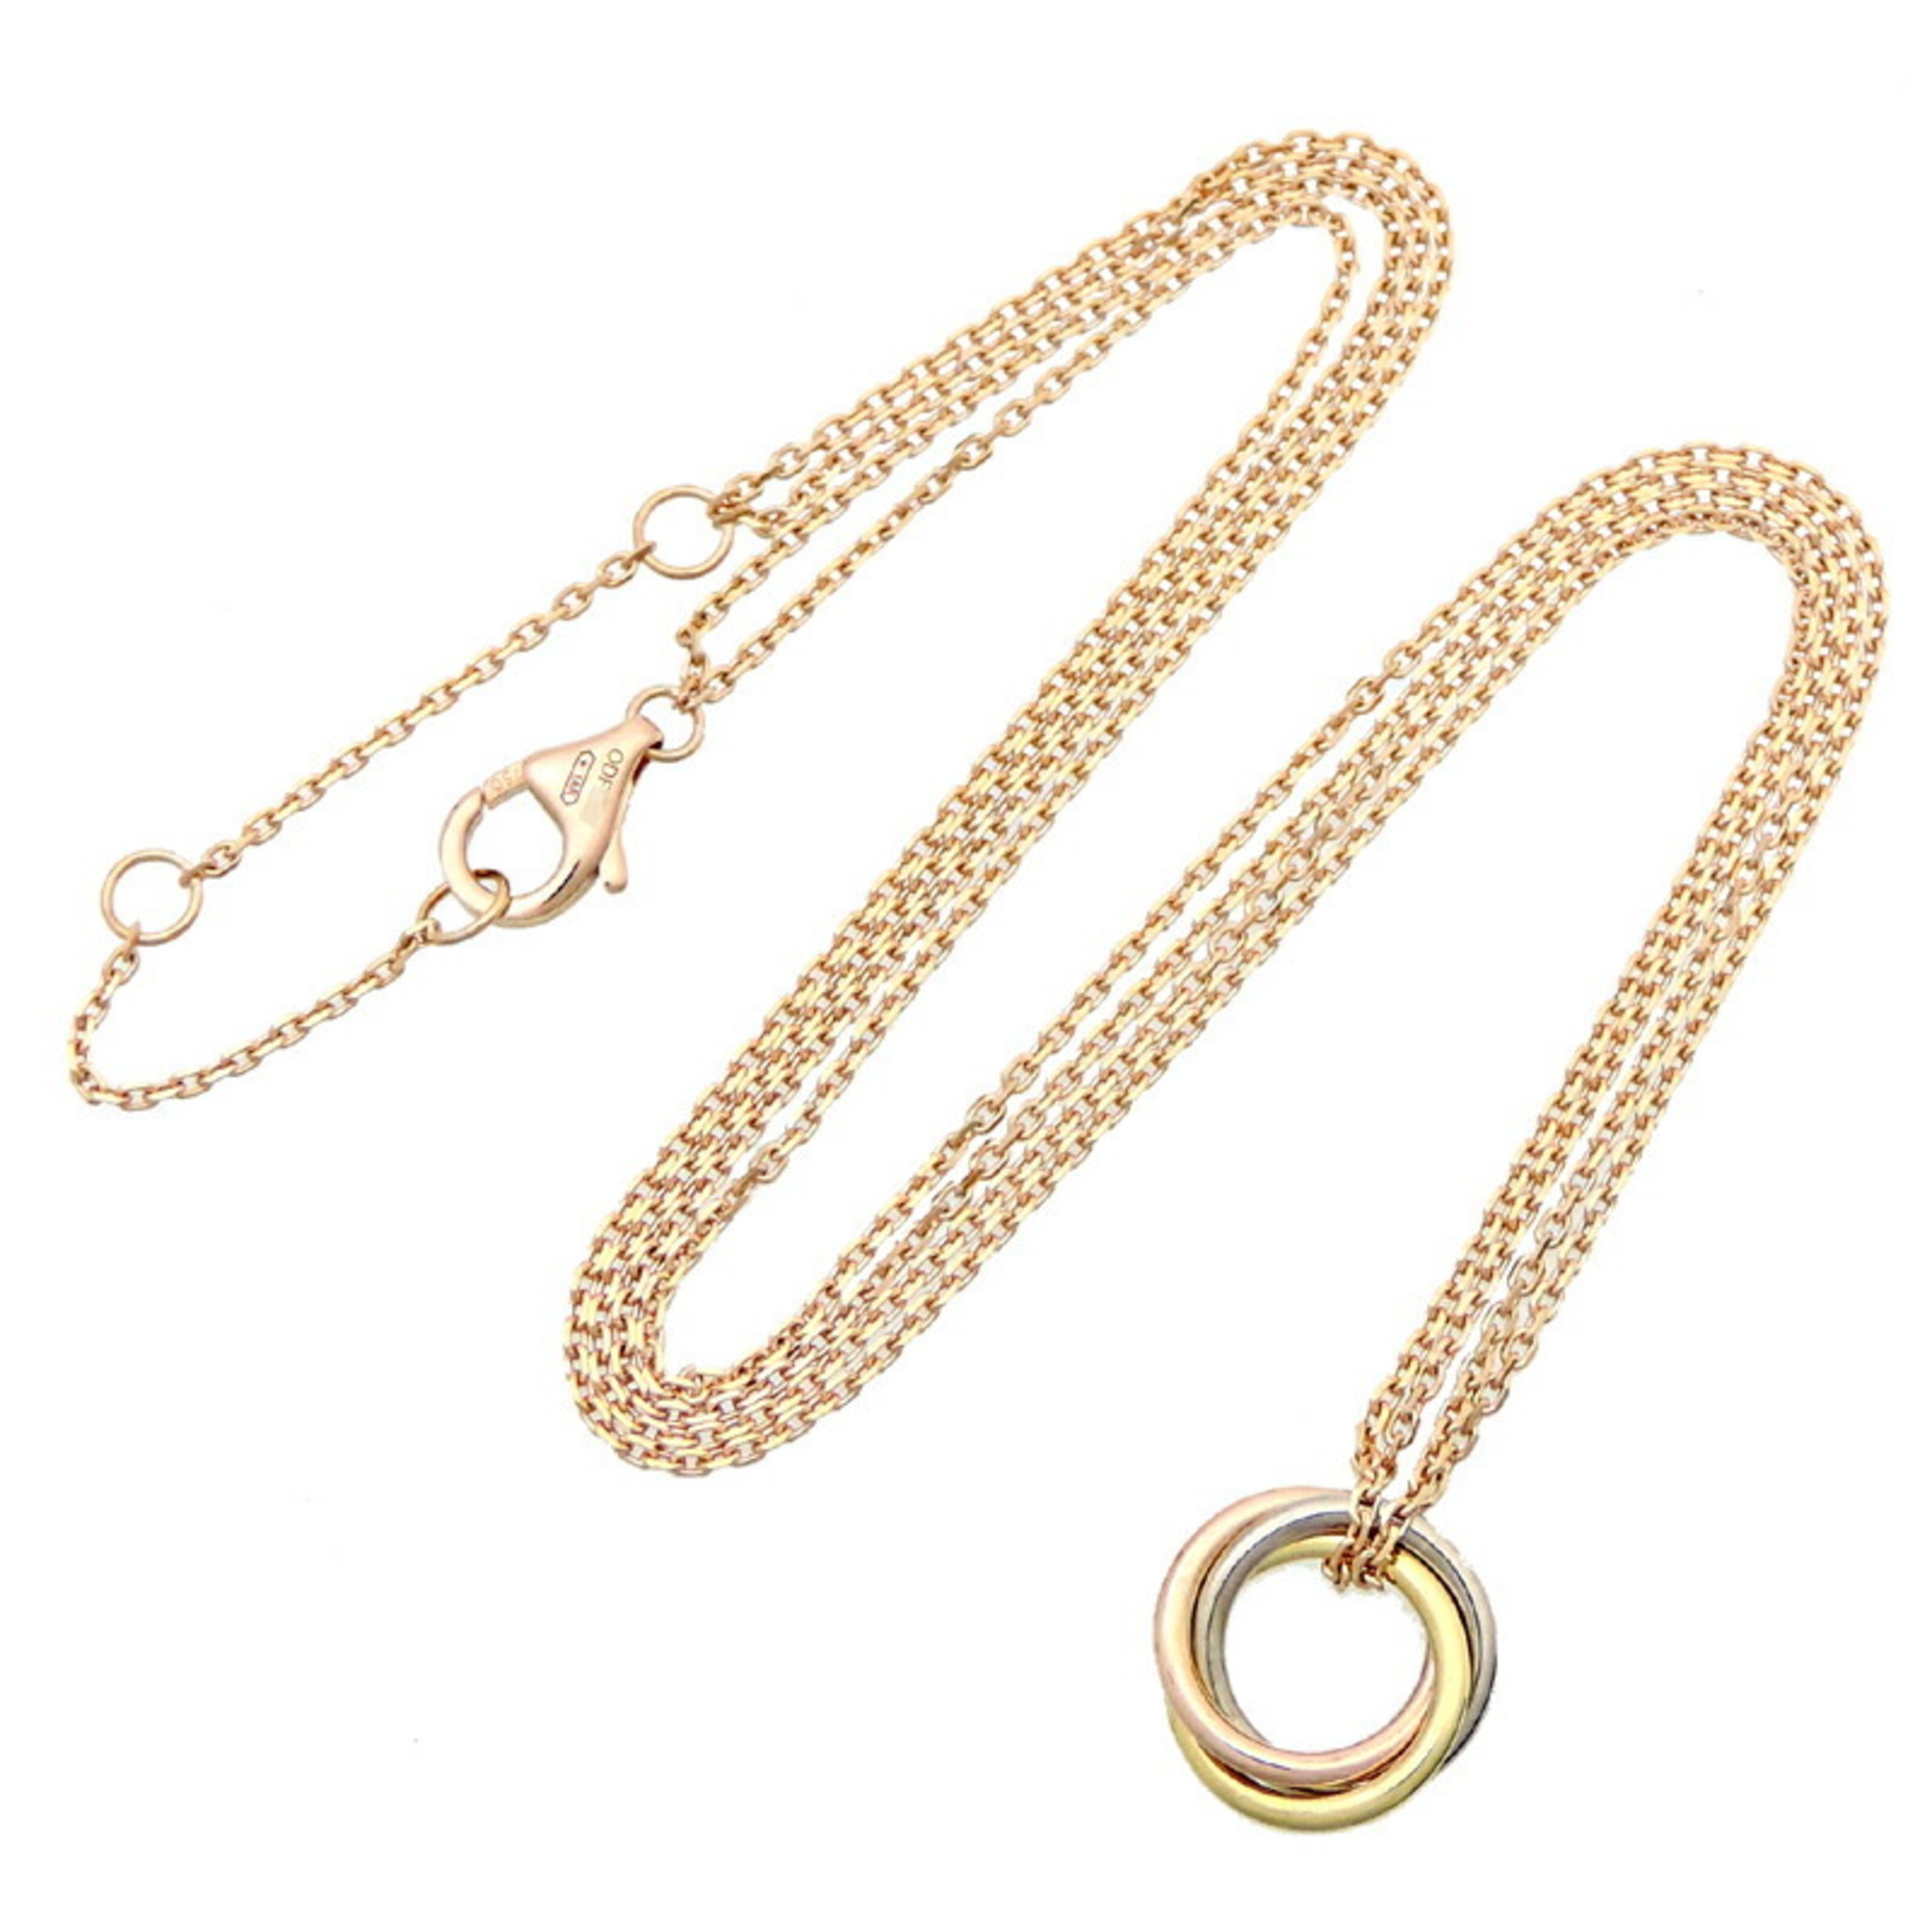 Cartier Sweet Trinity Women's Necklace B7218200 750 Yellow Gold